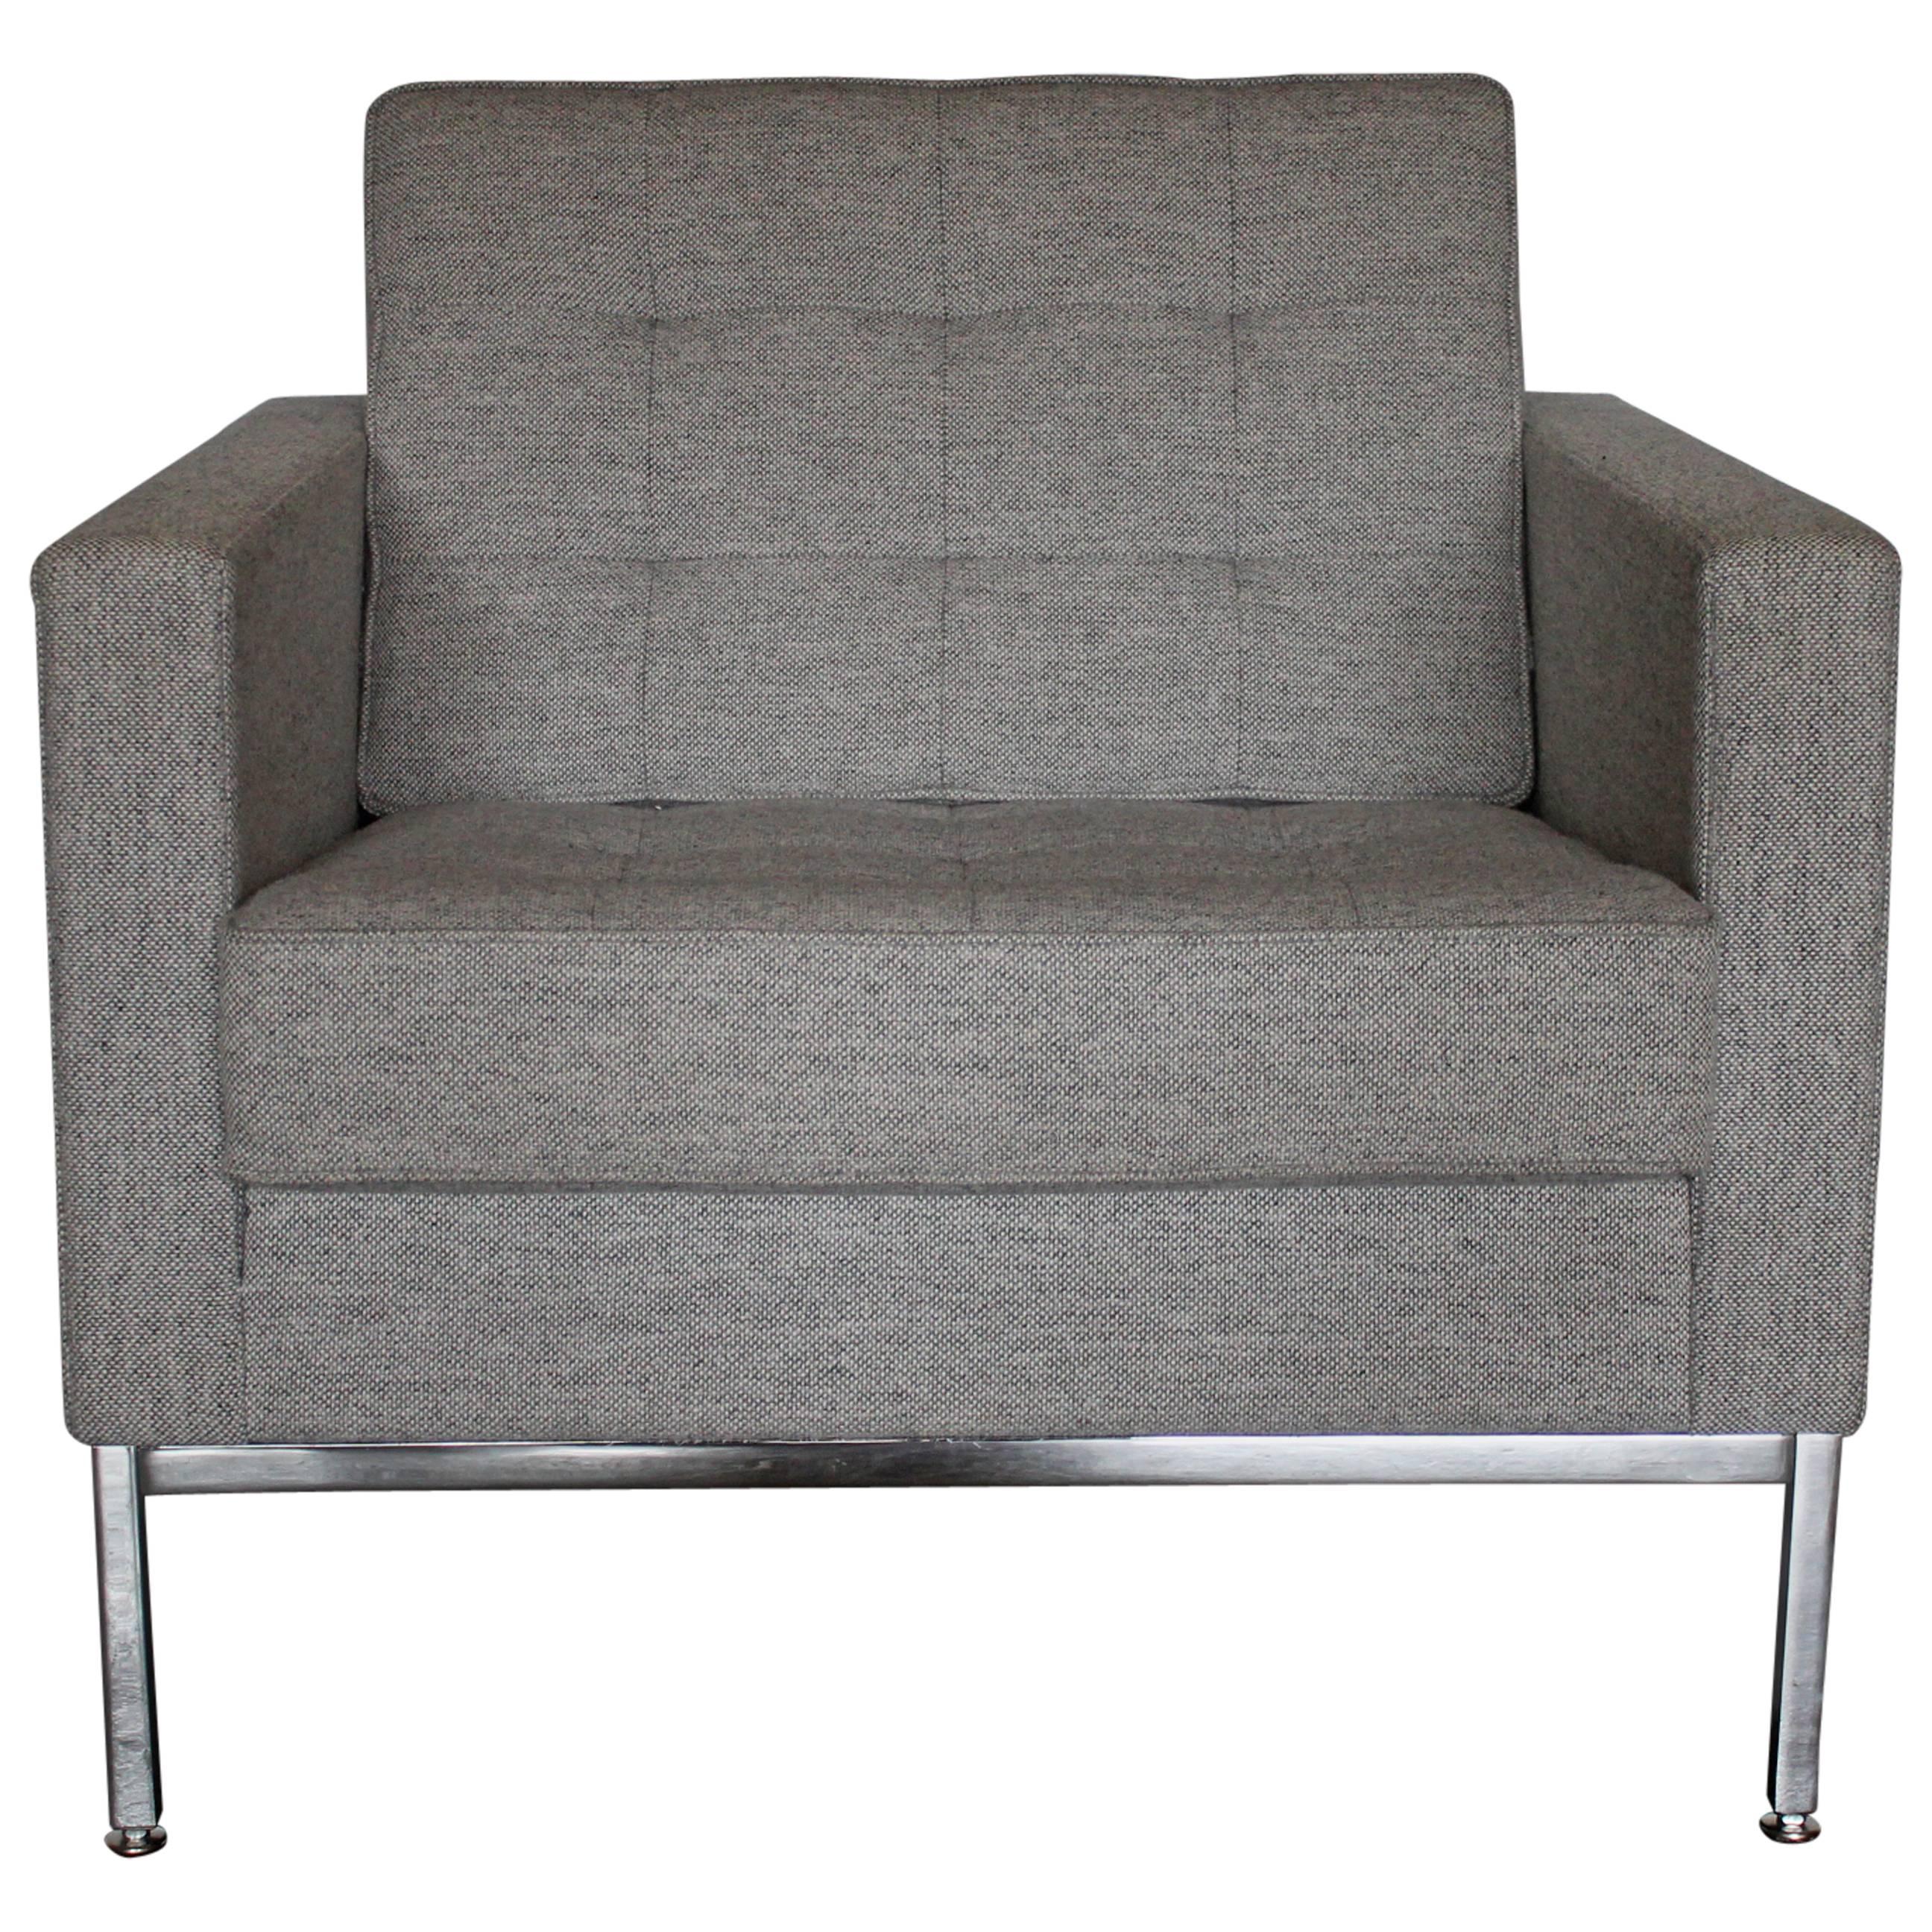 Knoll Studio "Florence Knoll" Lounge Armchair in Mid-Grey Wool